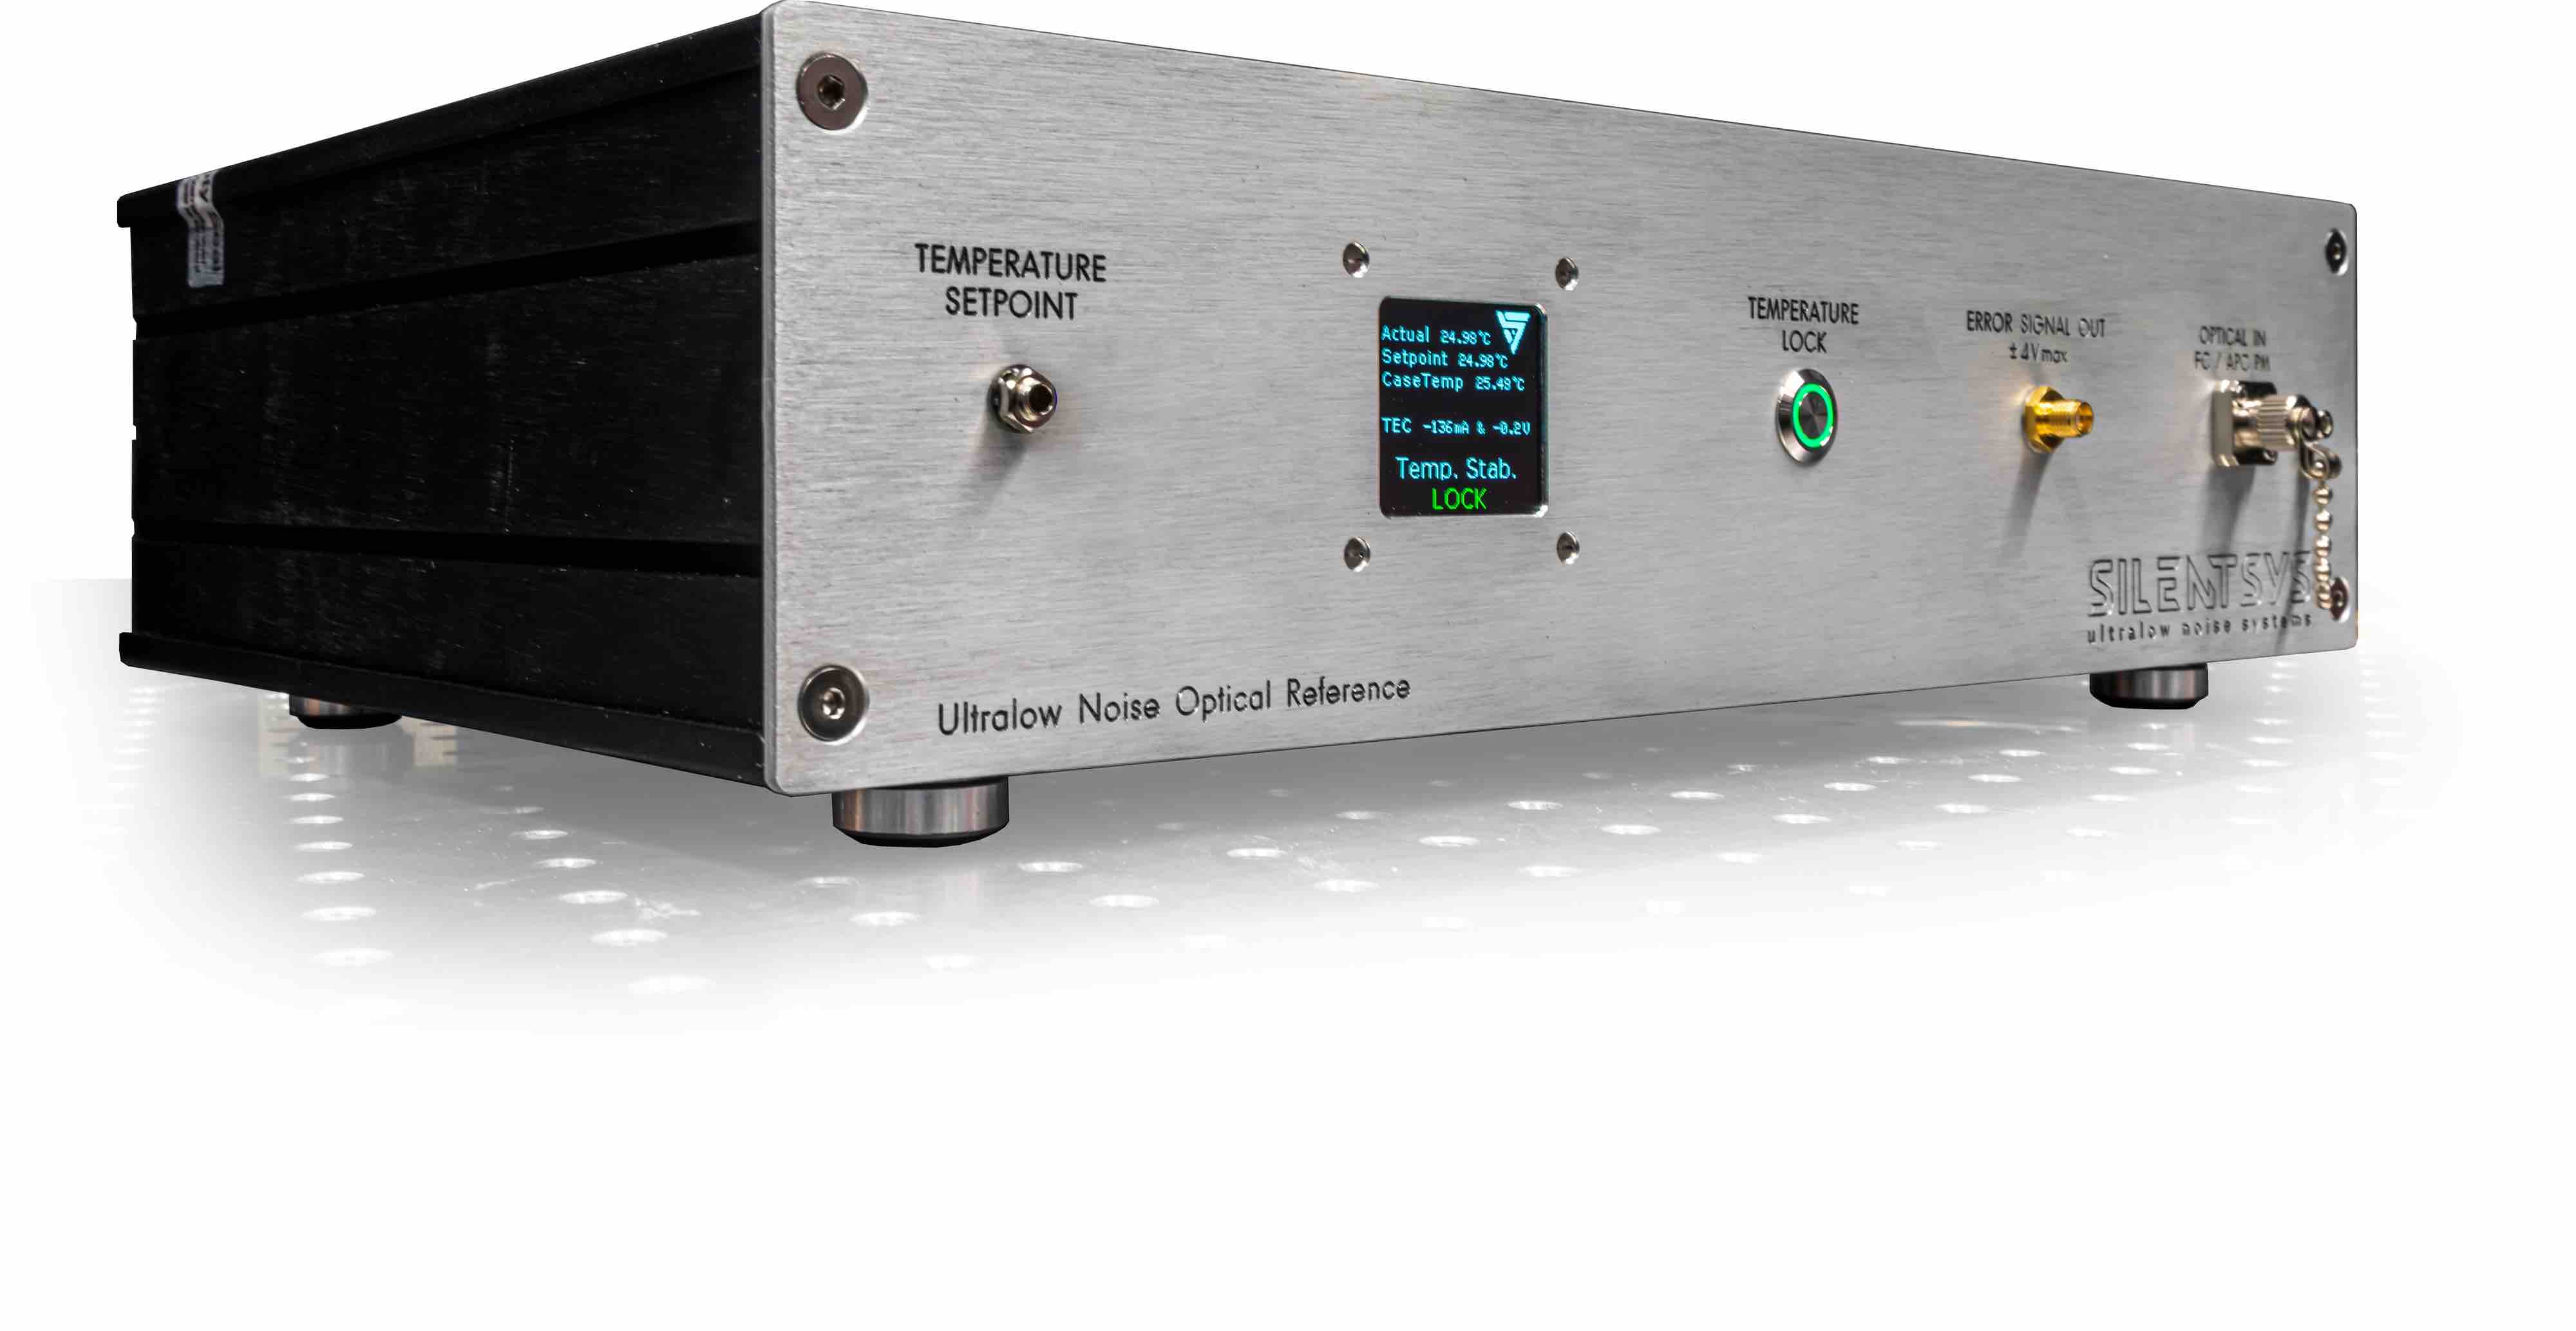 New SILENTSYS Optical Frequency Discriminator